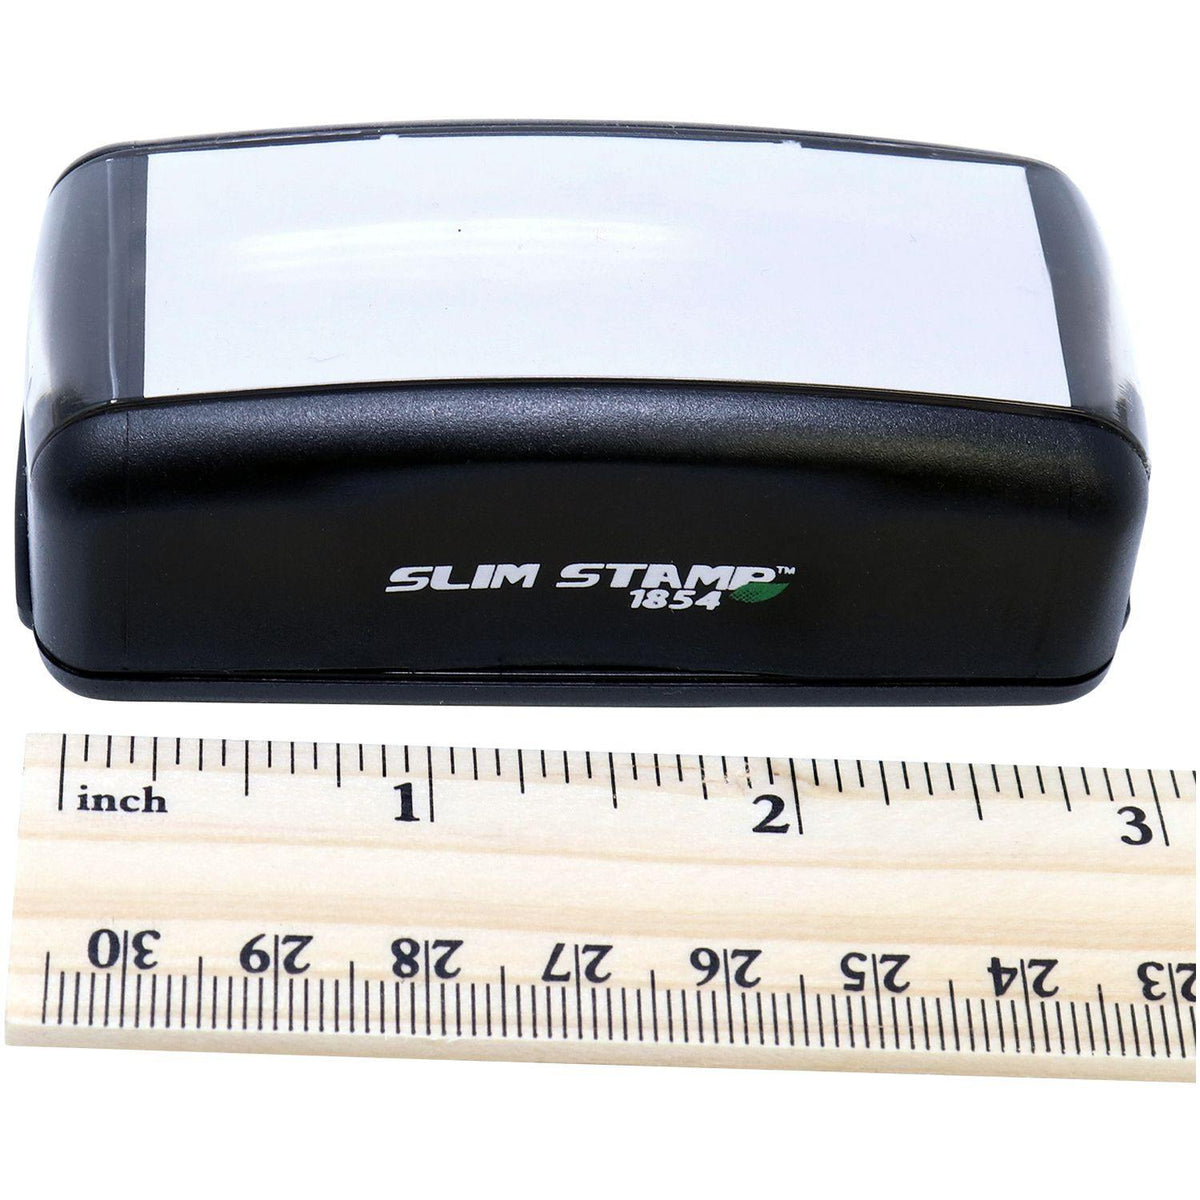 Measurement Large Pre Inked Investments Stamp with Ruler